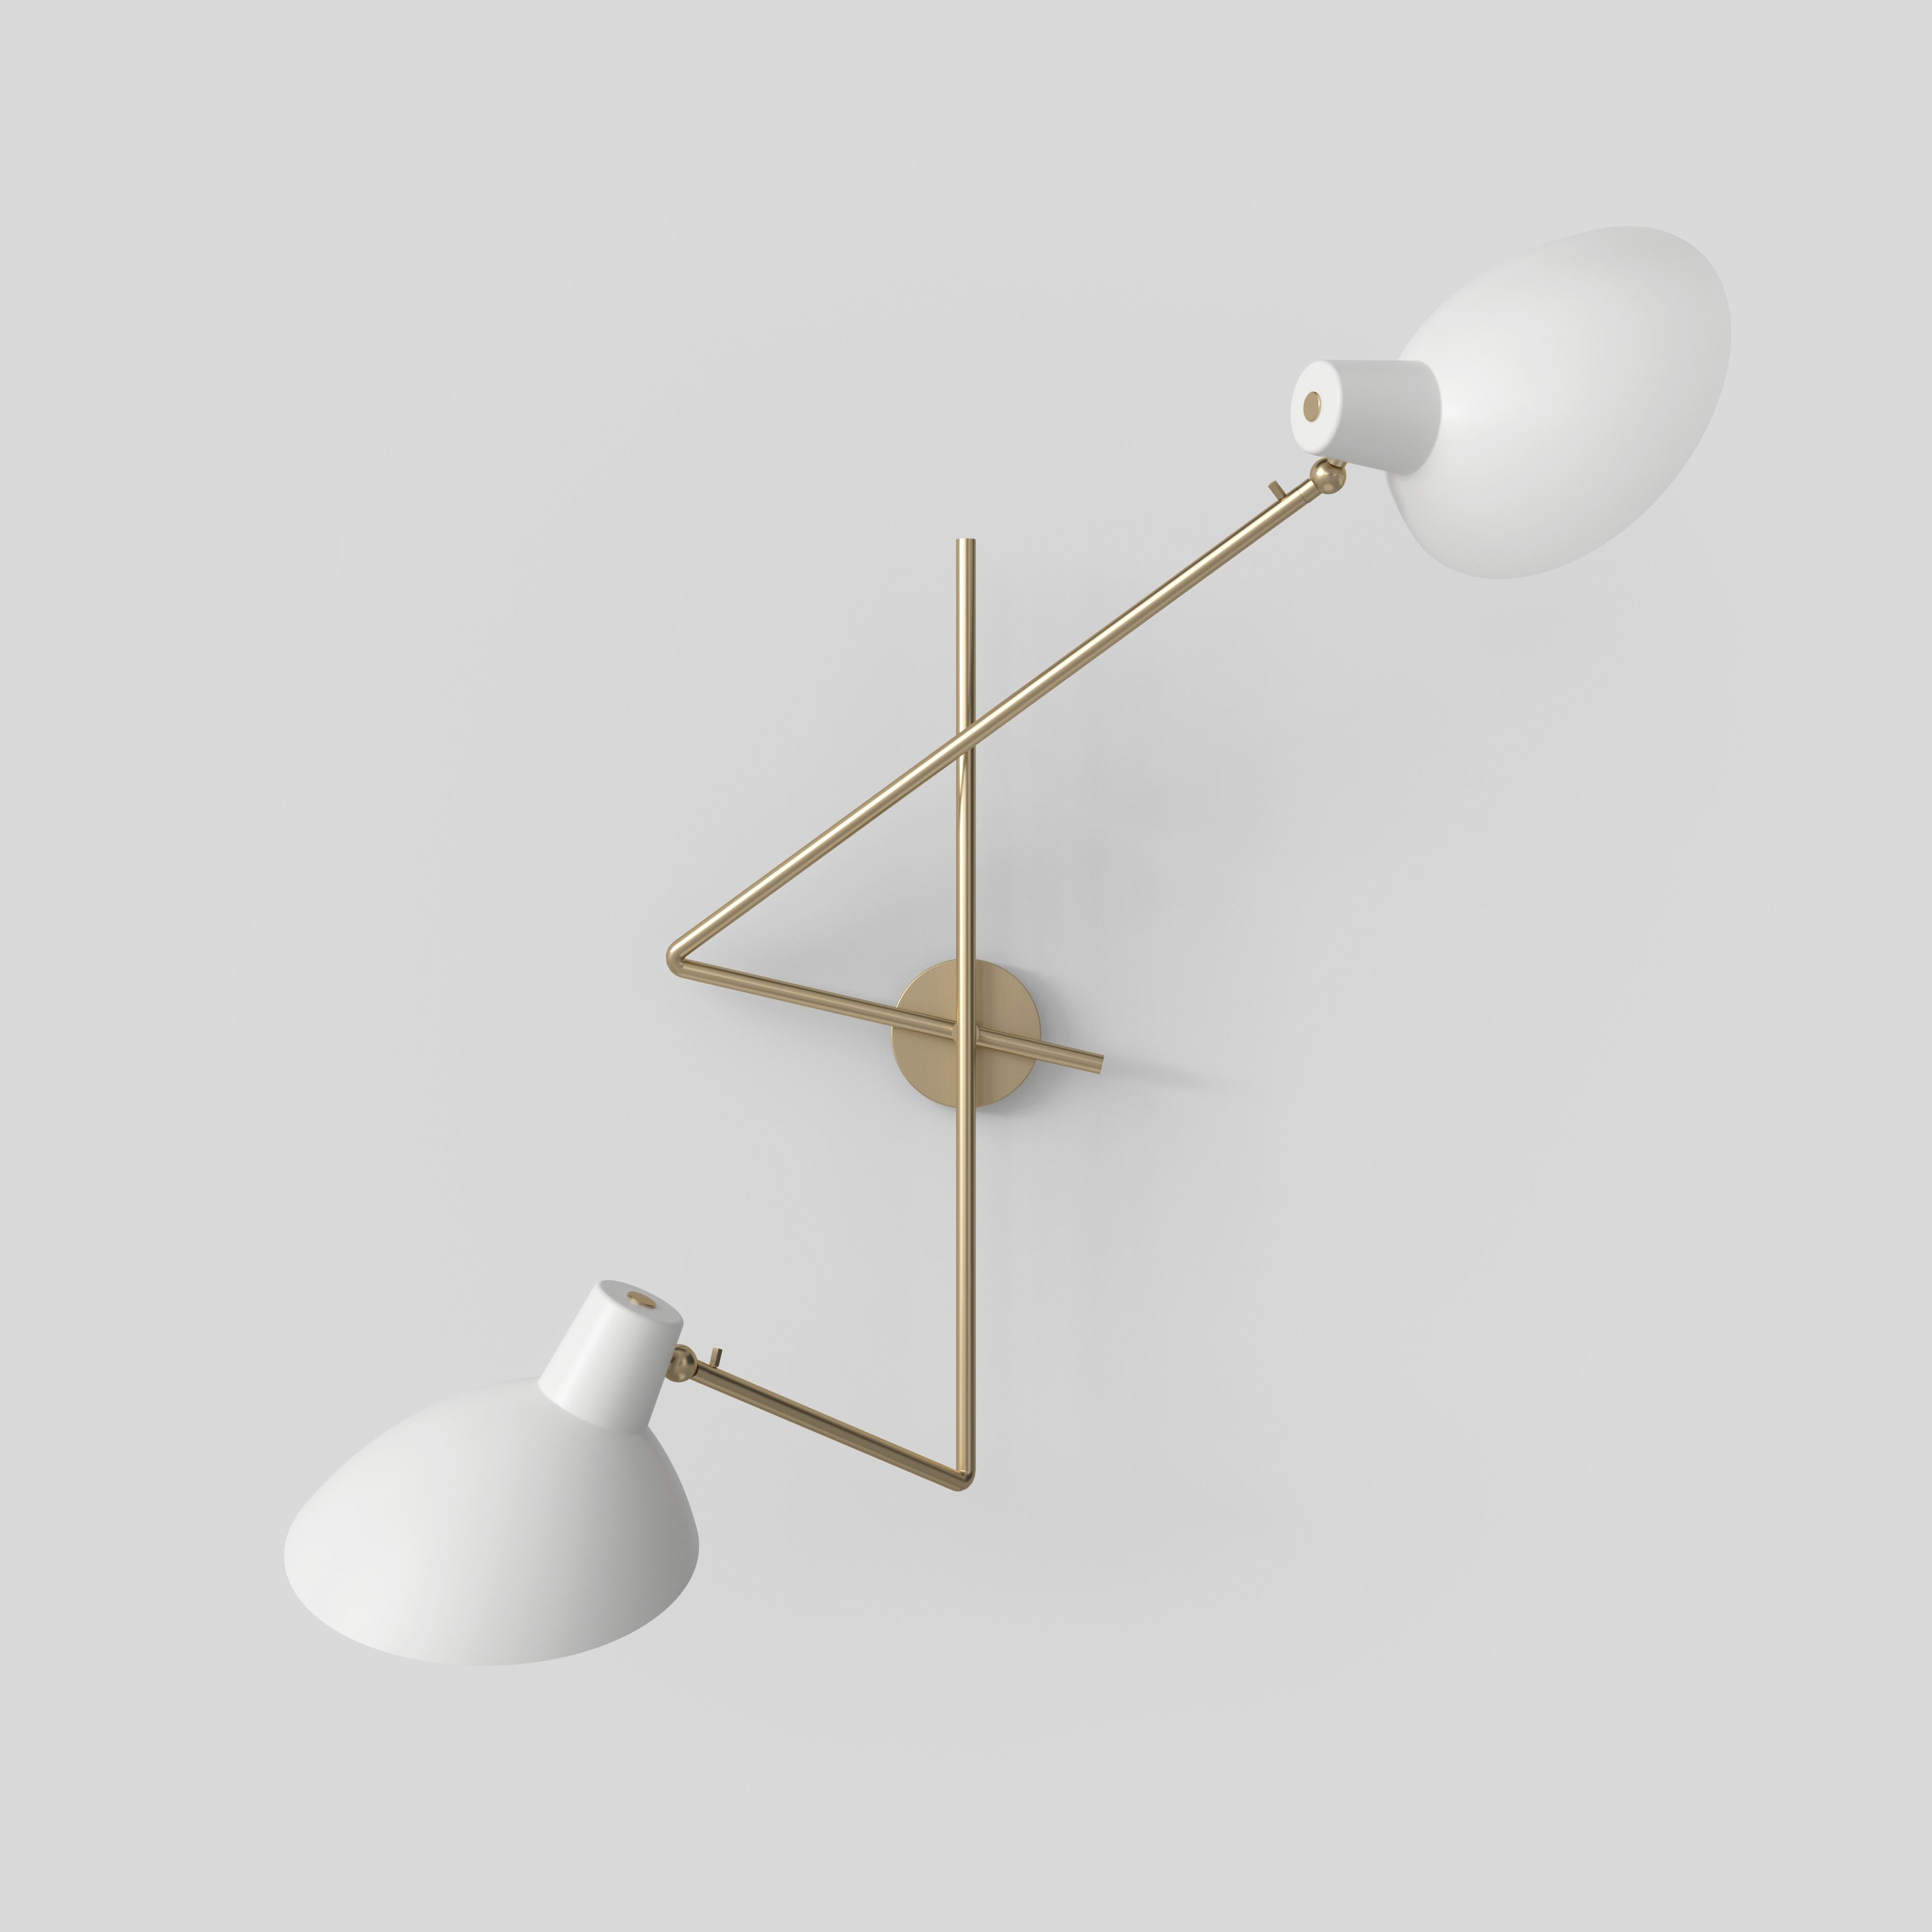 VV Cinquanta twin wall lamp
Design by Vittoriano Viganò
This version is with black lacquered reflector and brass mount.

The VV Cinquanta features an elegant and versatile posable direct light source that can swivel and tilt. The Twin model is an